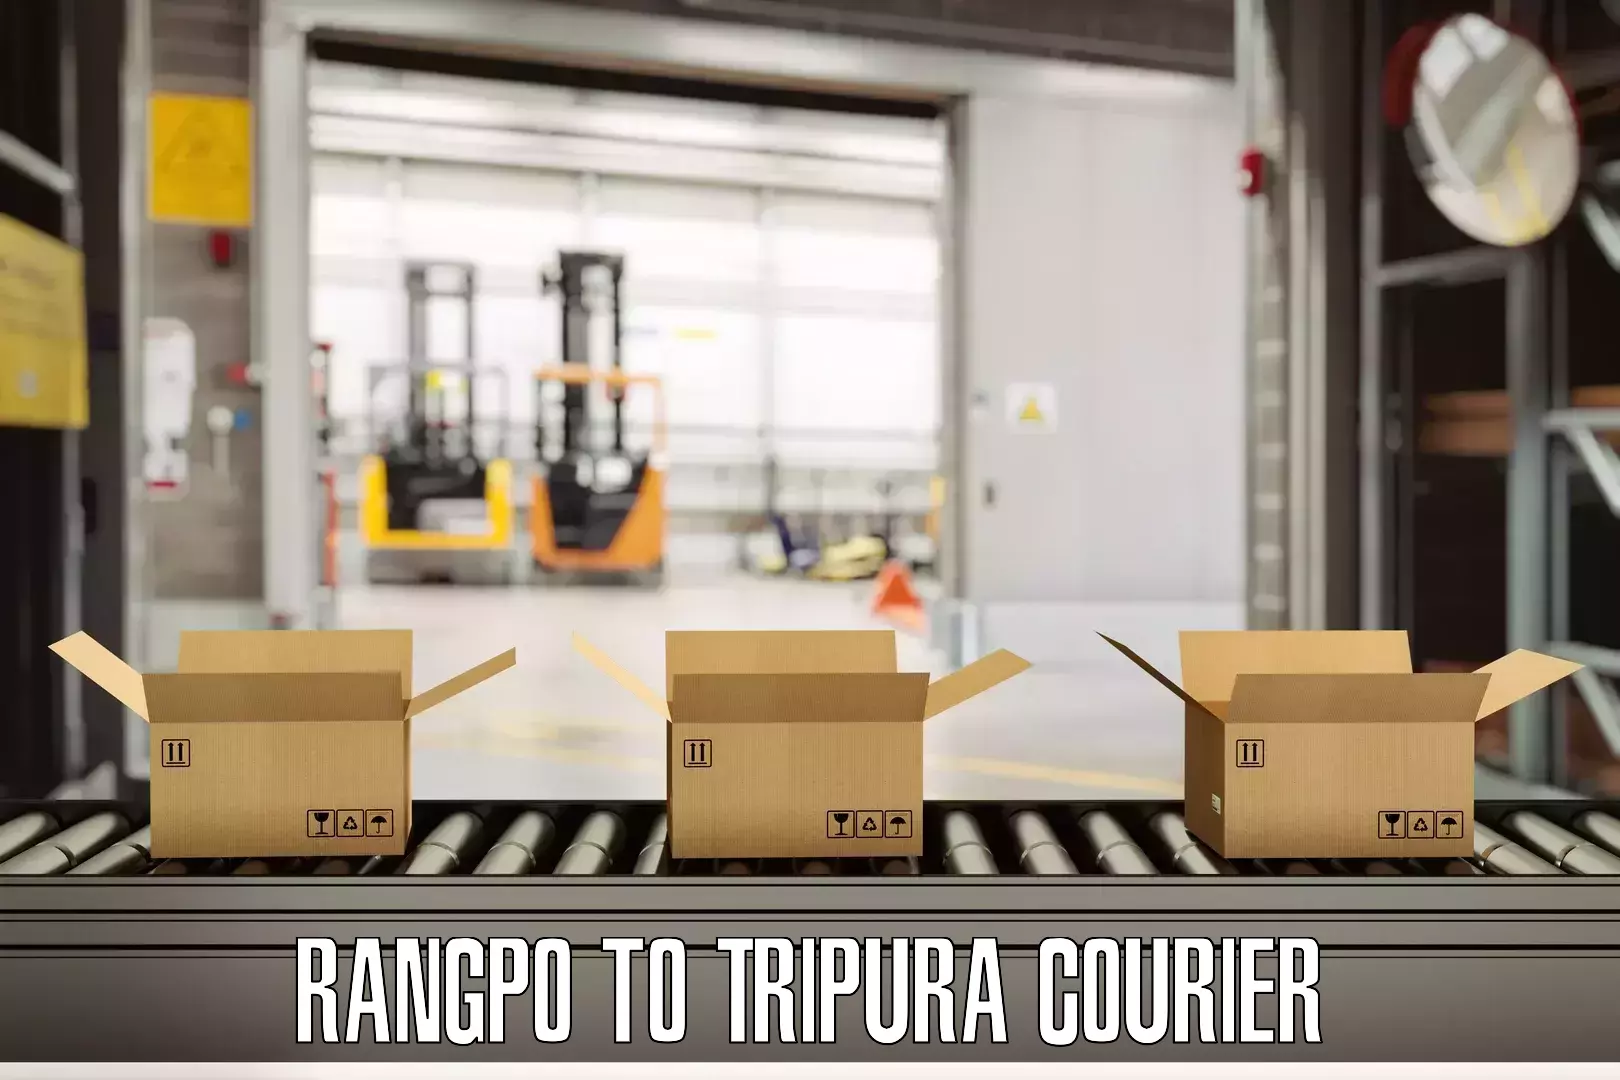 Online luggage shipping booking in Rangpo to West Tripura